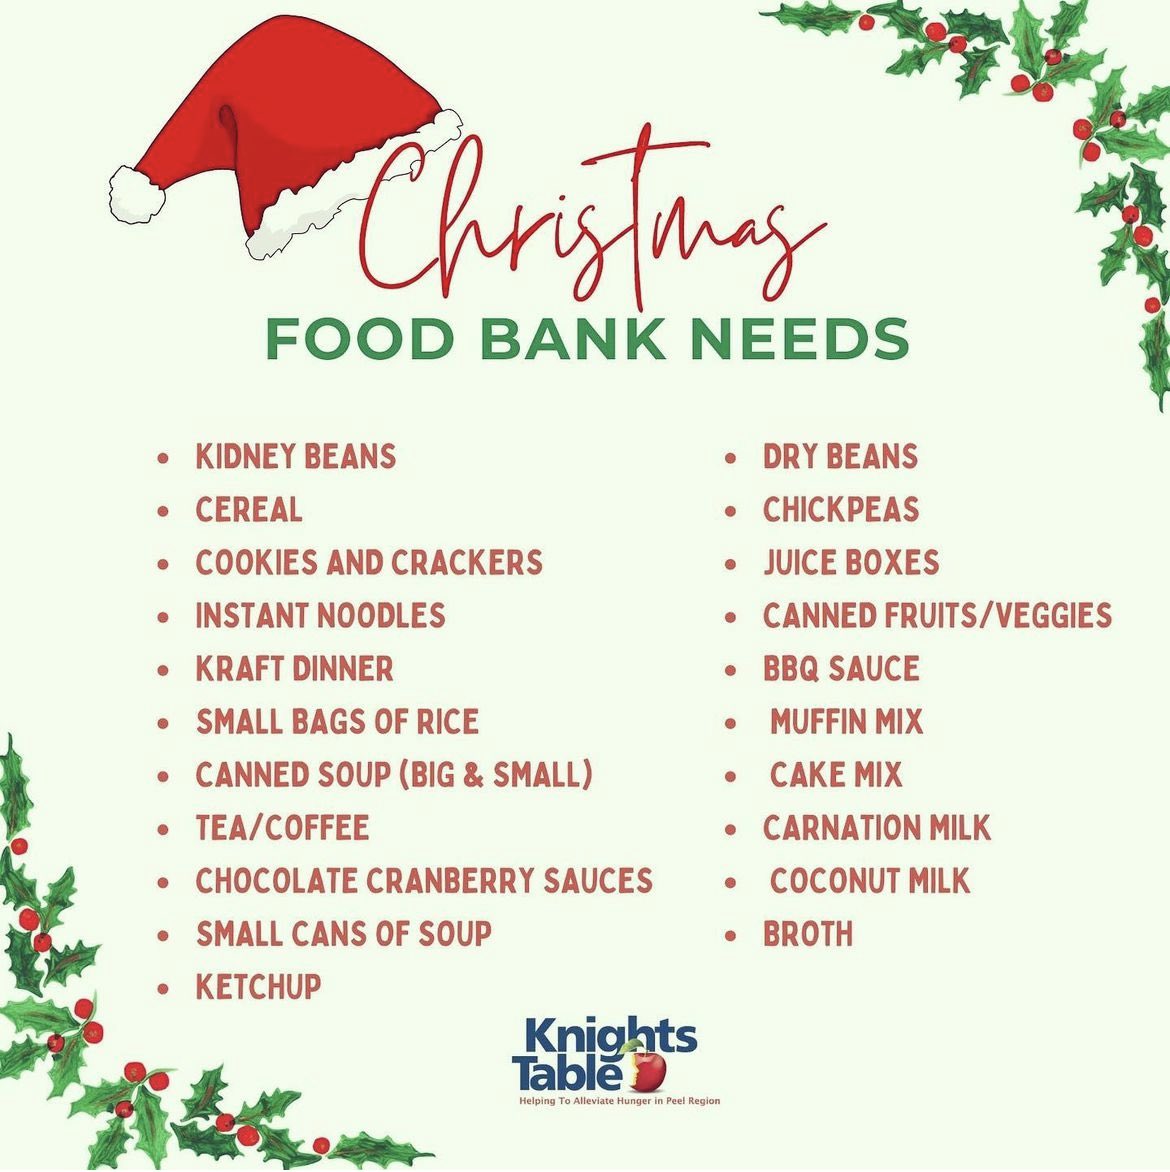 Many families cannot afford much of what we take for granted during the holidays like a pantry full of food. Your donations help us prepare hundreds of hampers filled with the delights and necessities that make the season magical for families in need. #ChristmasDonation